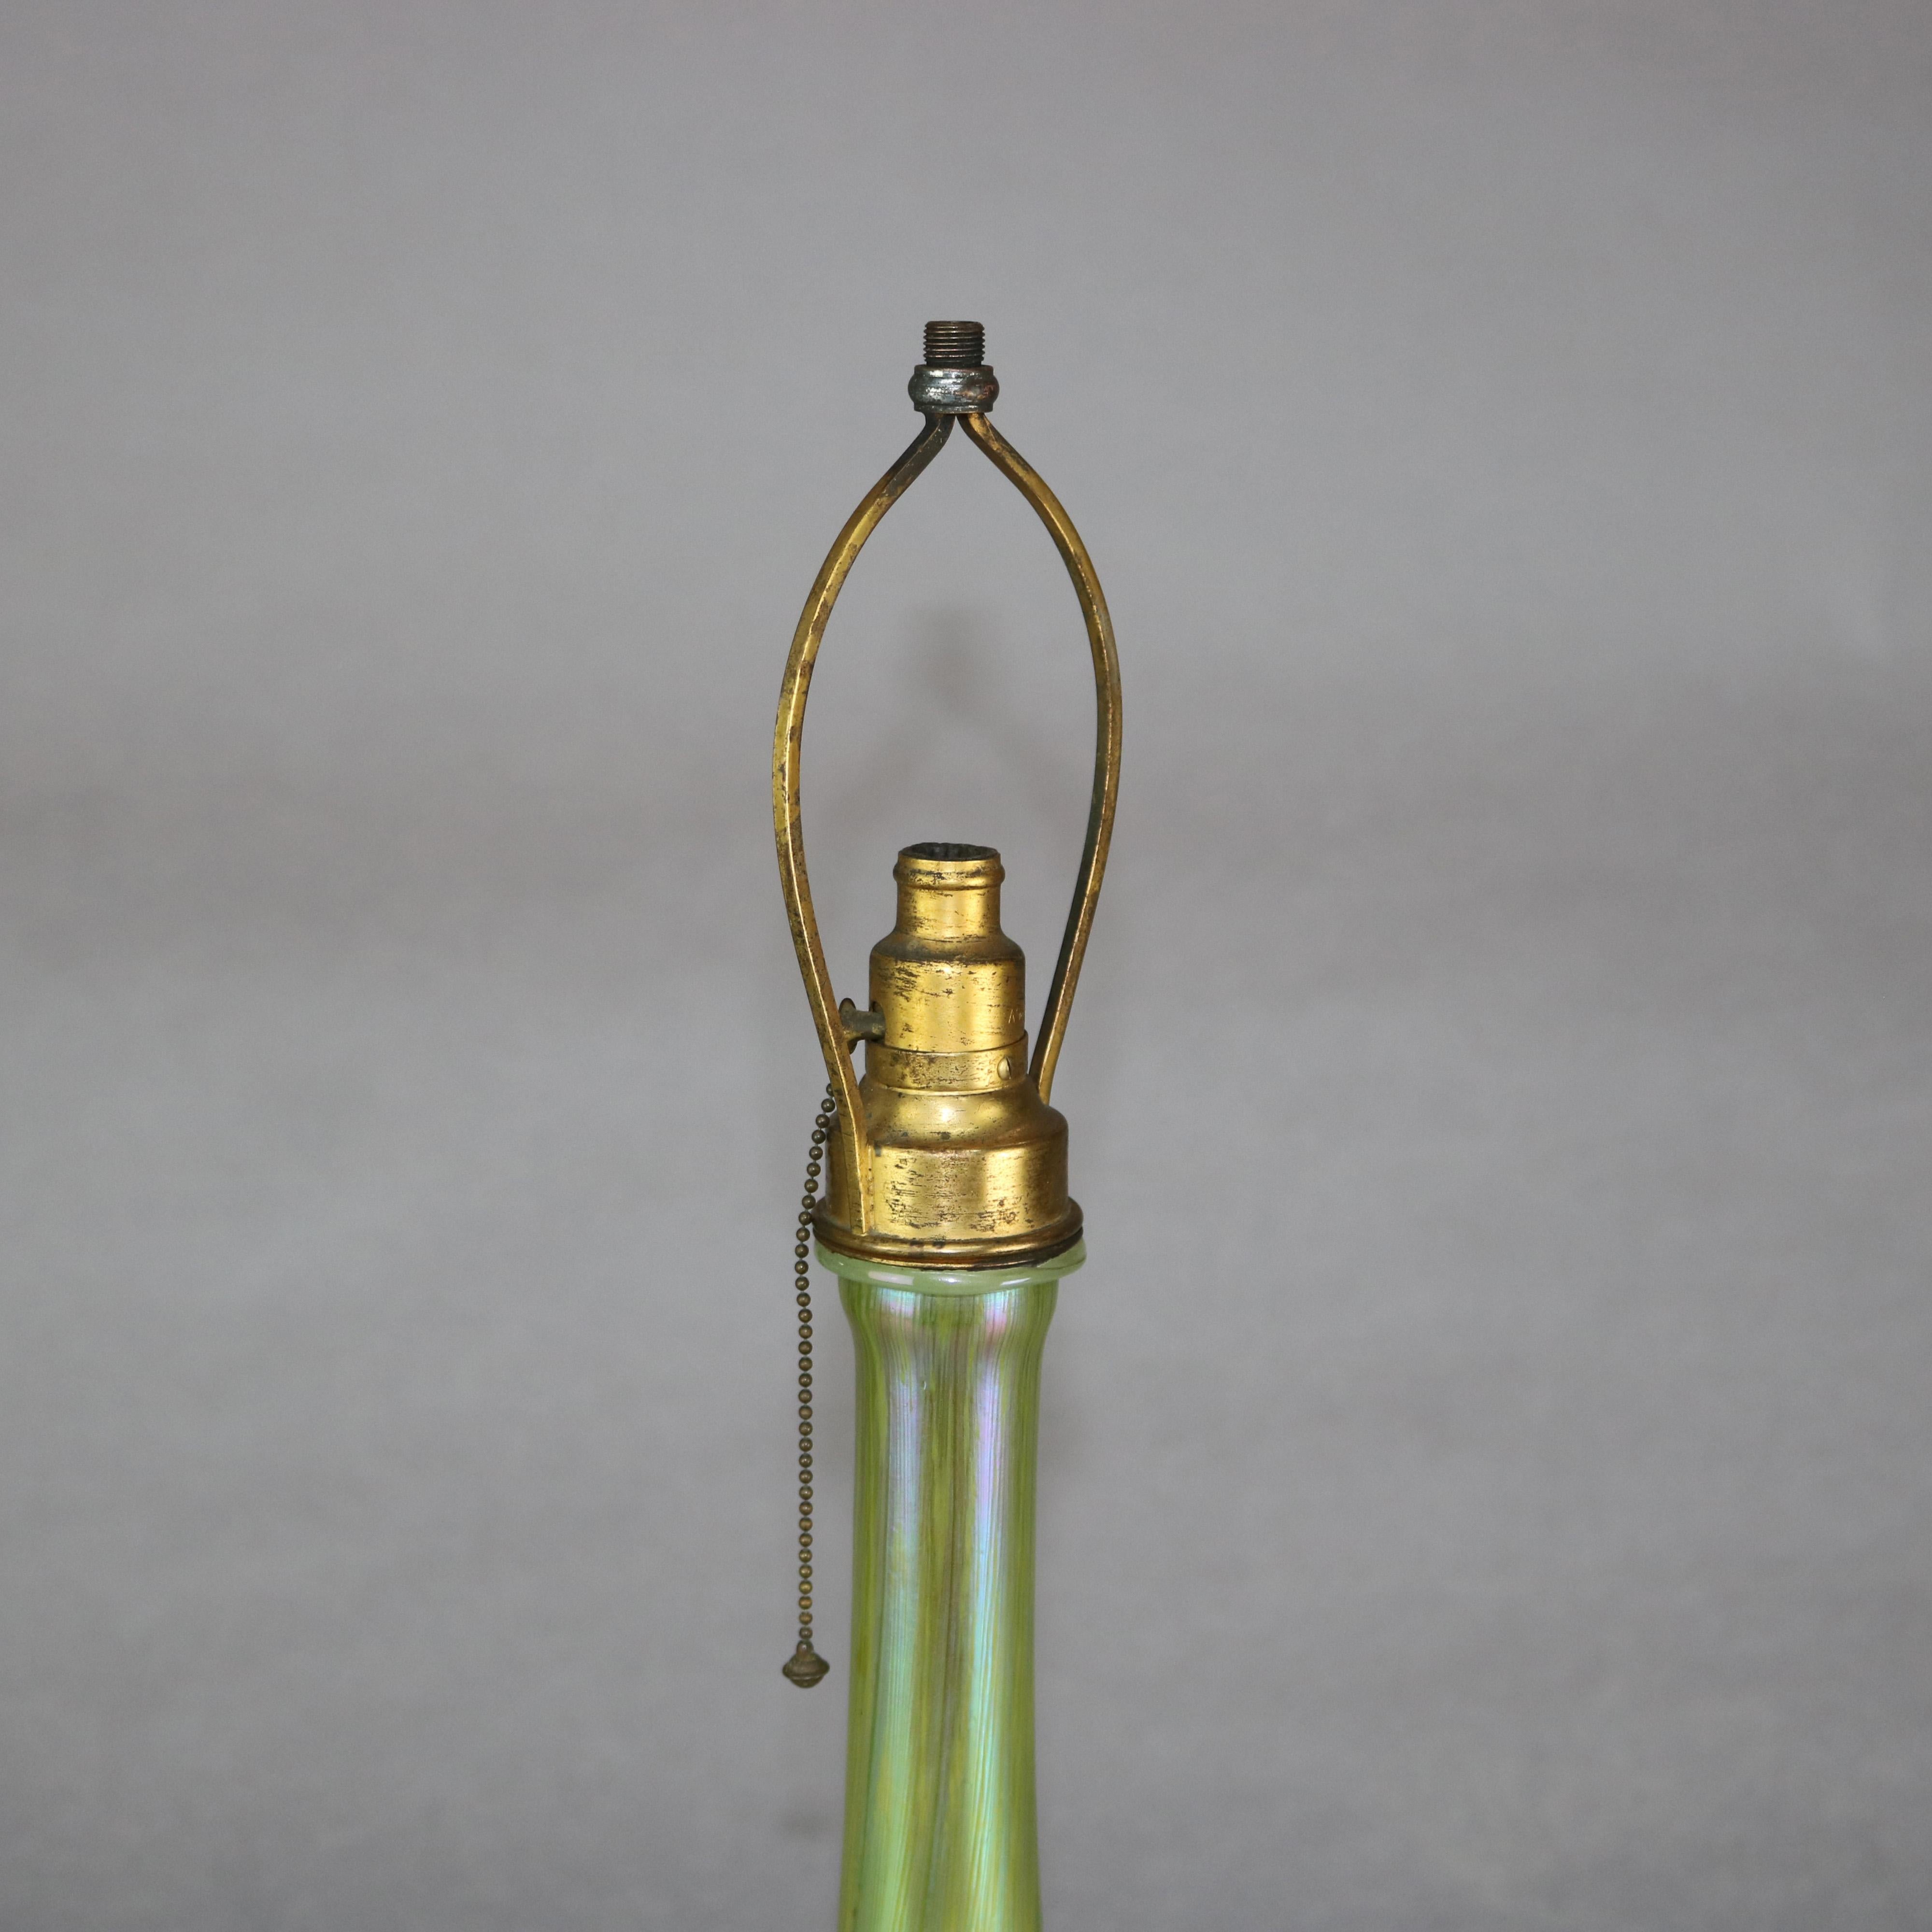 An antique Favrile art glass single socket table lamp base by L.C. Tiffany offers flared form with green, white and gold pulled feather design, signed on base as photographed, circa 1920

Measures: 17.5